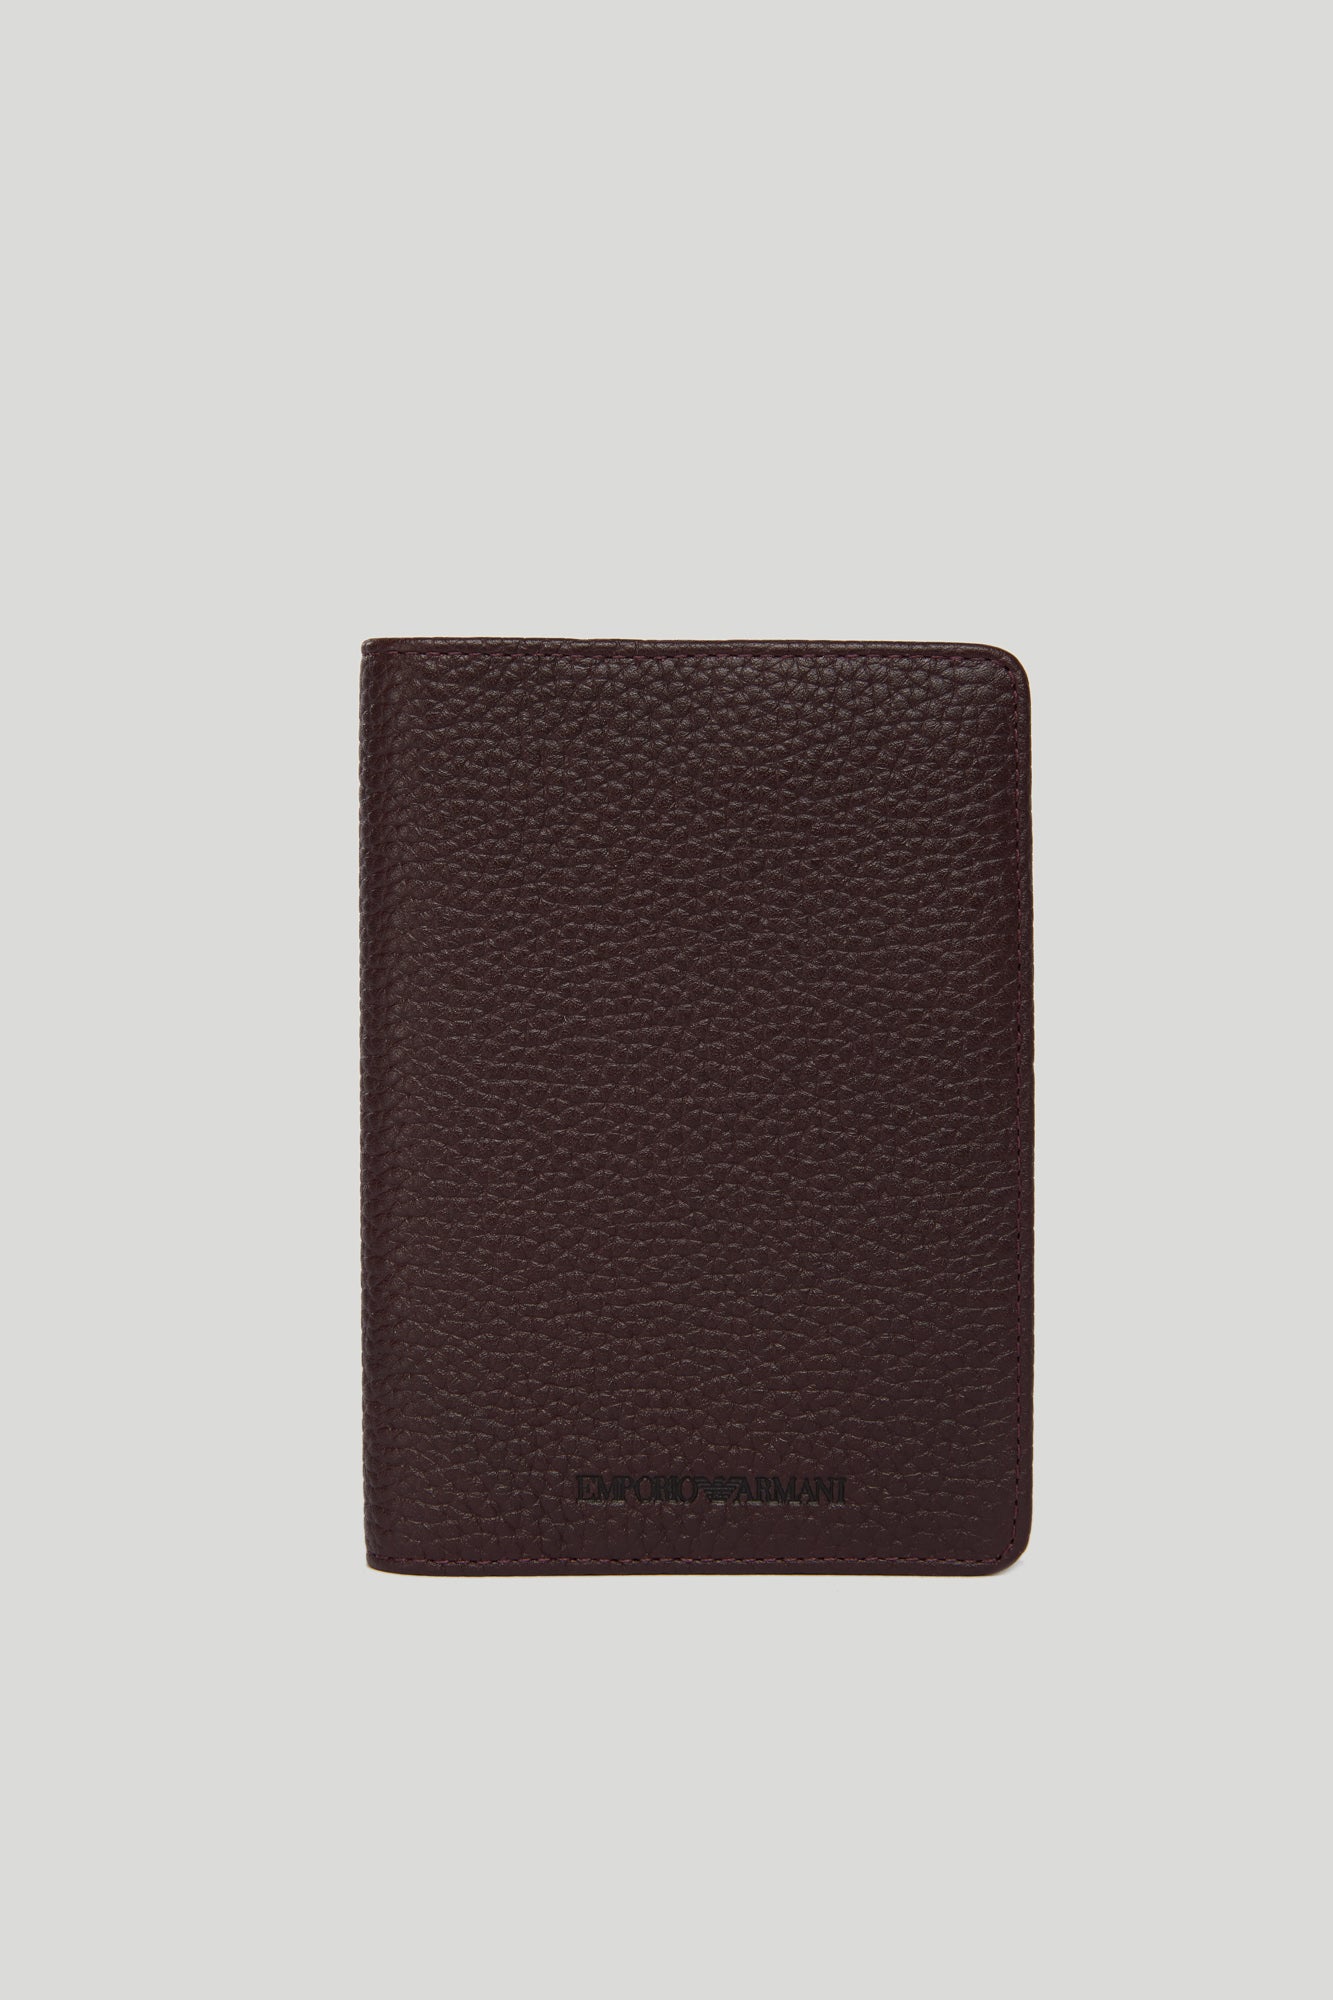 EMPORIO ARMANI Document holder in brown leather